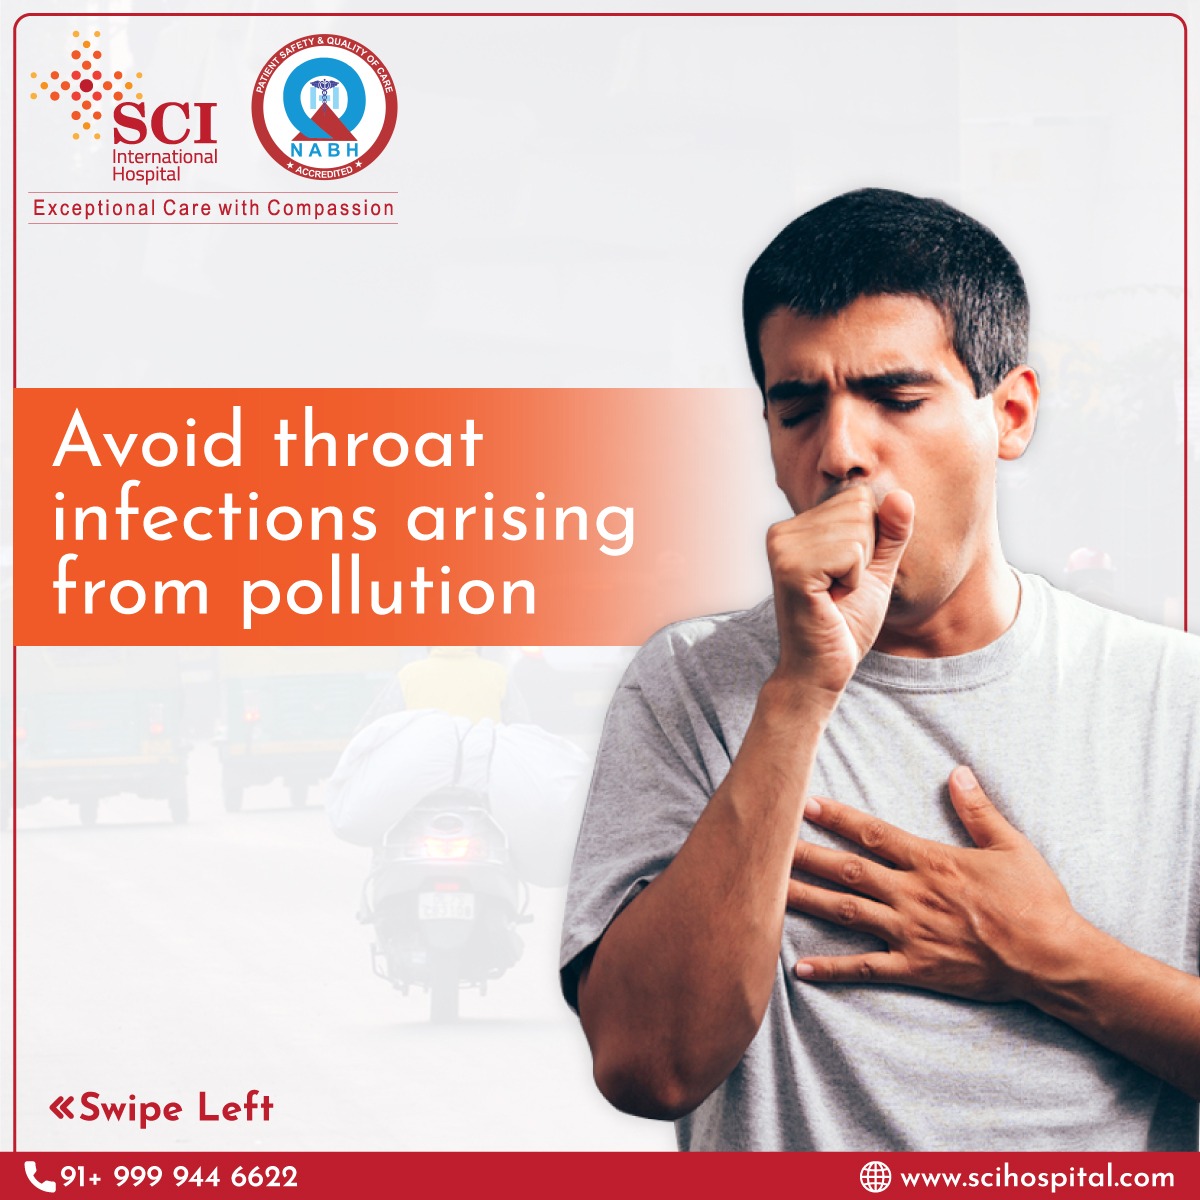 Increased #airpollution levels can cause many health risks like #coughing, shortness of breath, and #throatirritation.

#SCIhospital   #throatinfection  #breathingproblem #throatpain #throatswelling #pollution #throatinfection